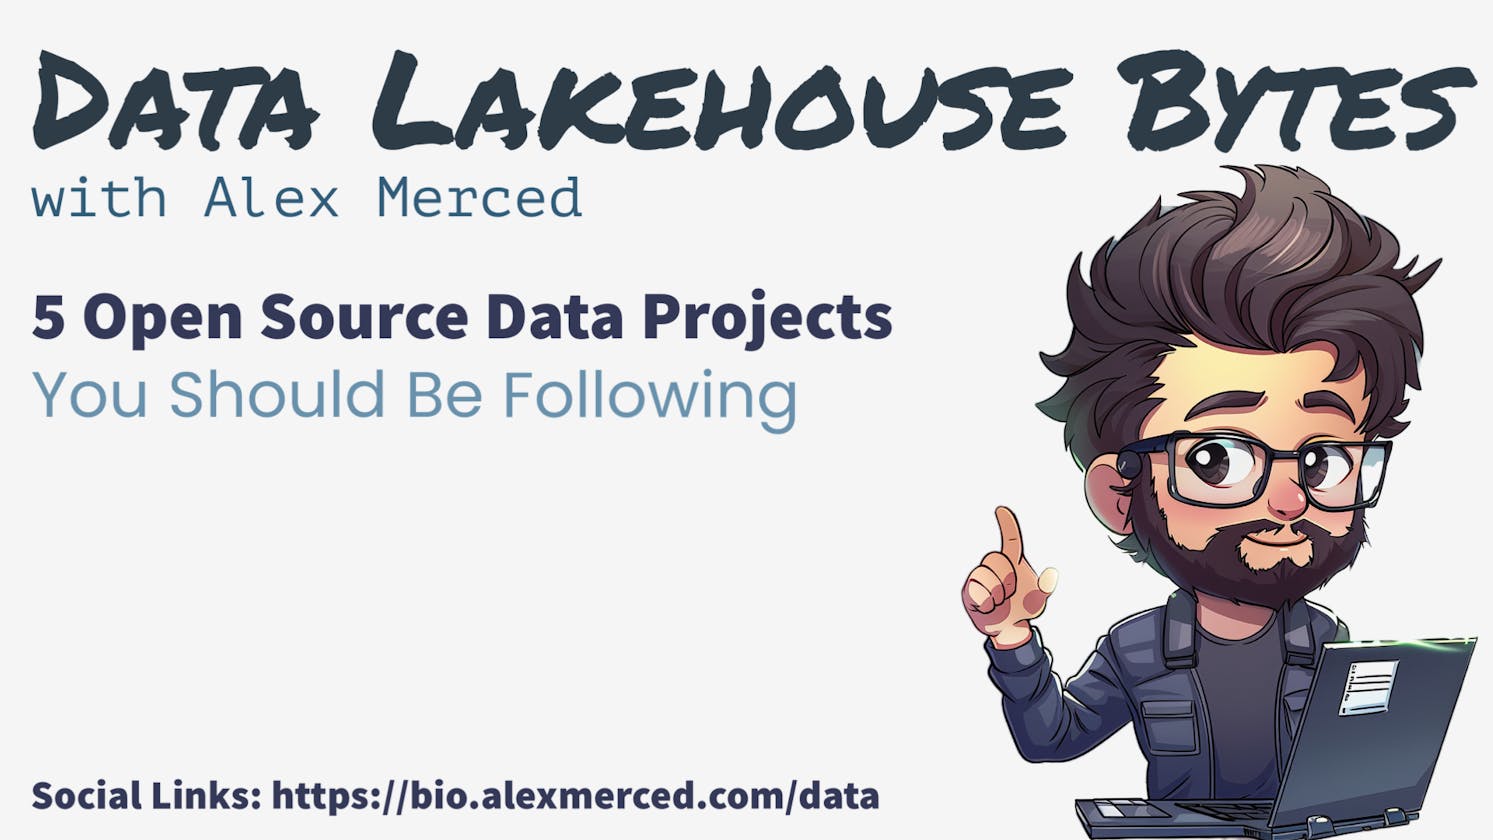 5 Open Source Data Projects You Should Be Following